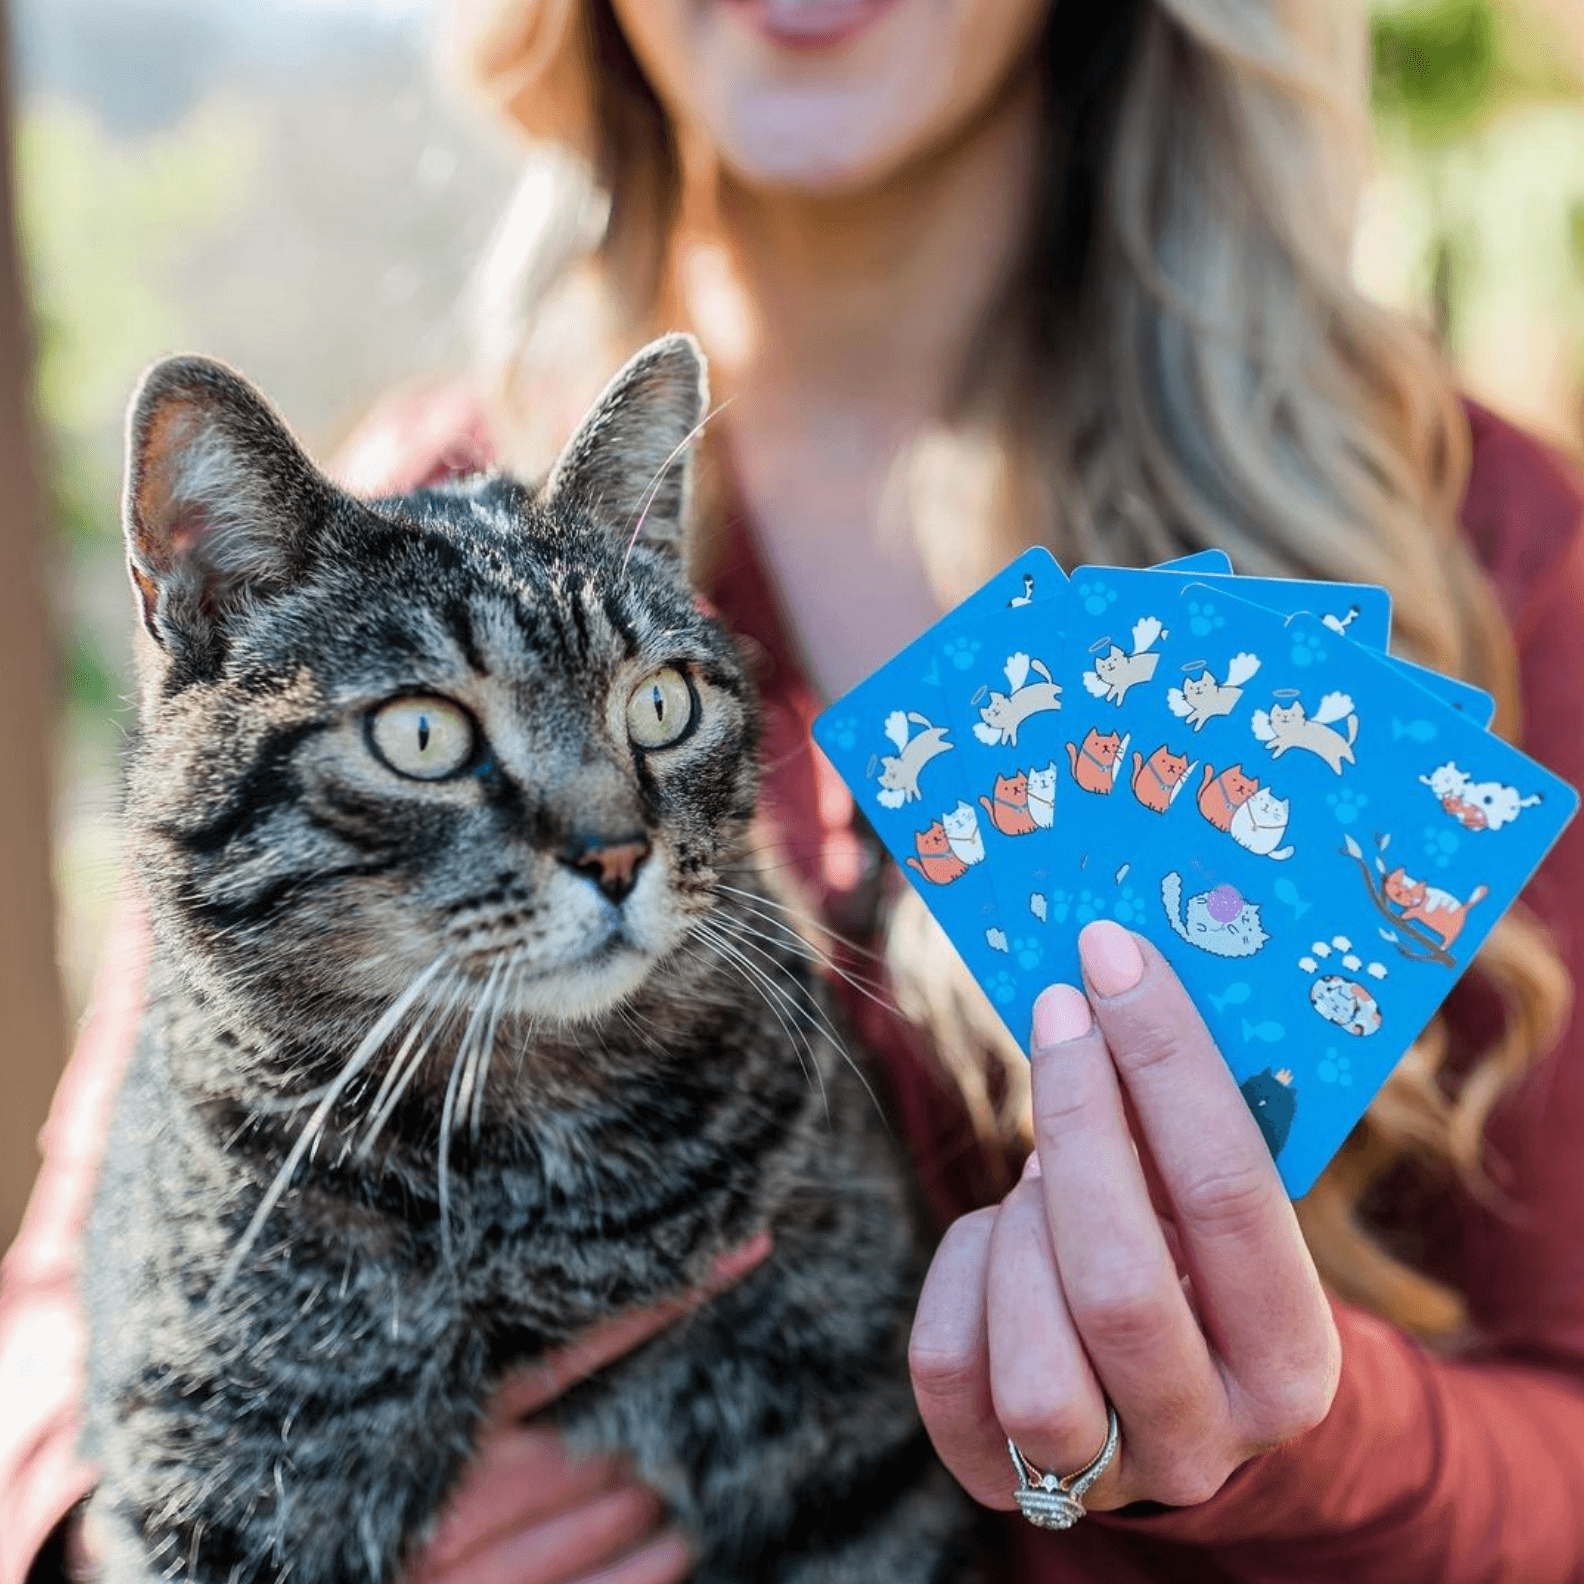 Woman holding a cat and an illustrative deck of cards.